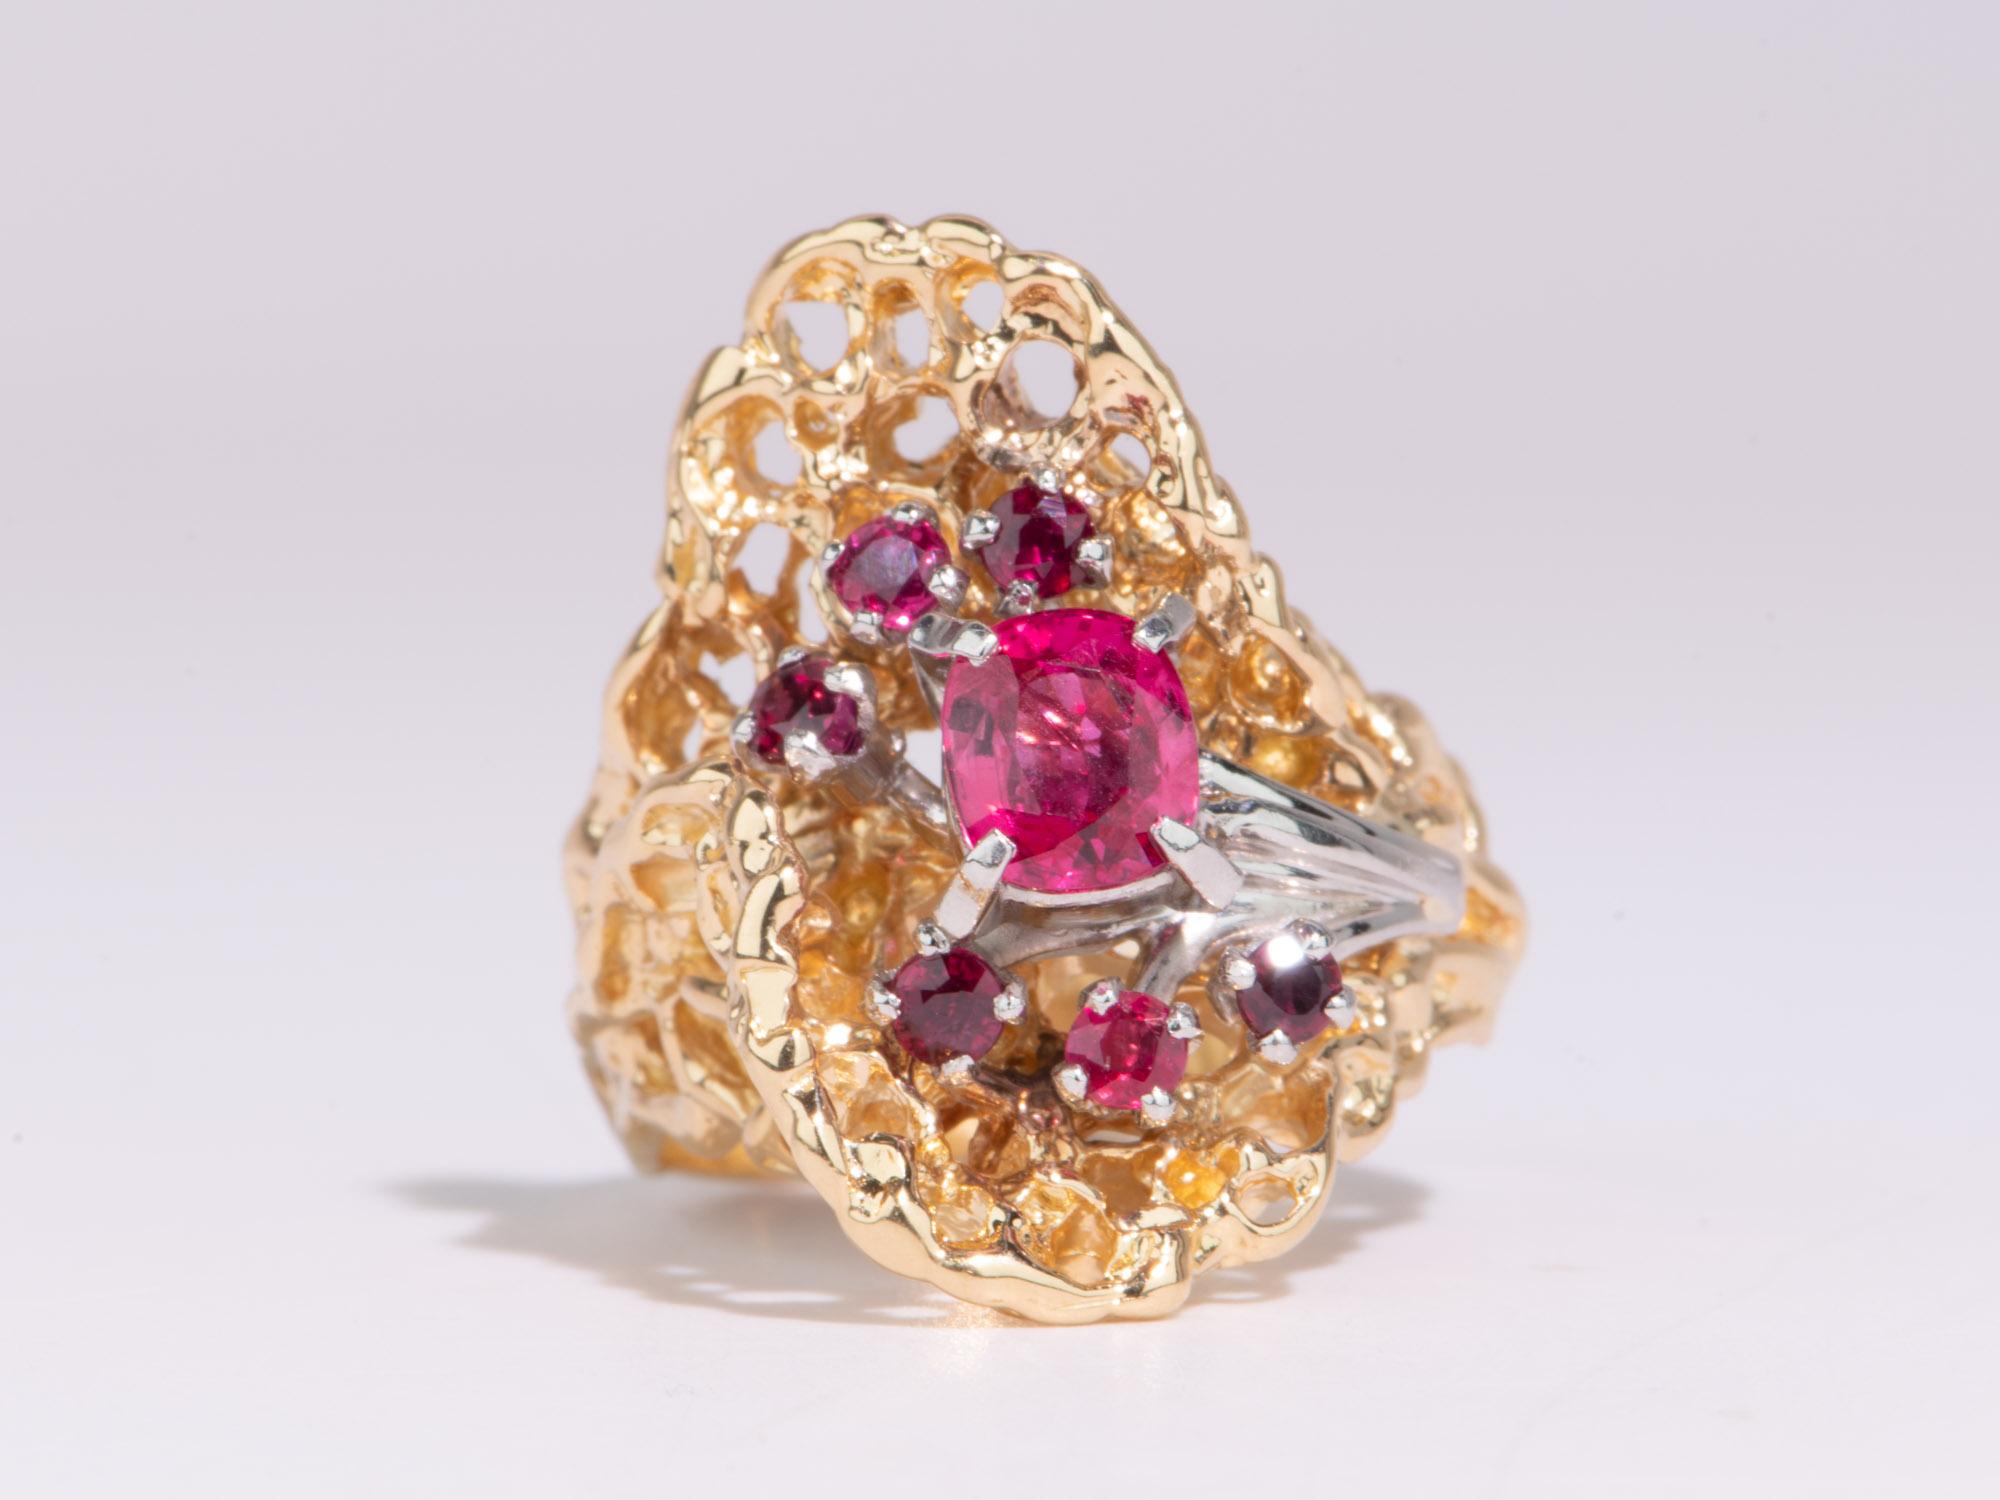 Flaunt your unique style with this statement ring! Crafted in an organic design and bright red and pink gemstones, this one-of-a-kind piece will surely make you stand out. Shine in the spotlight with this exquisite piece!


♥ The face of the ring